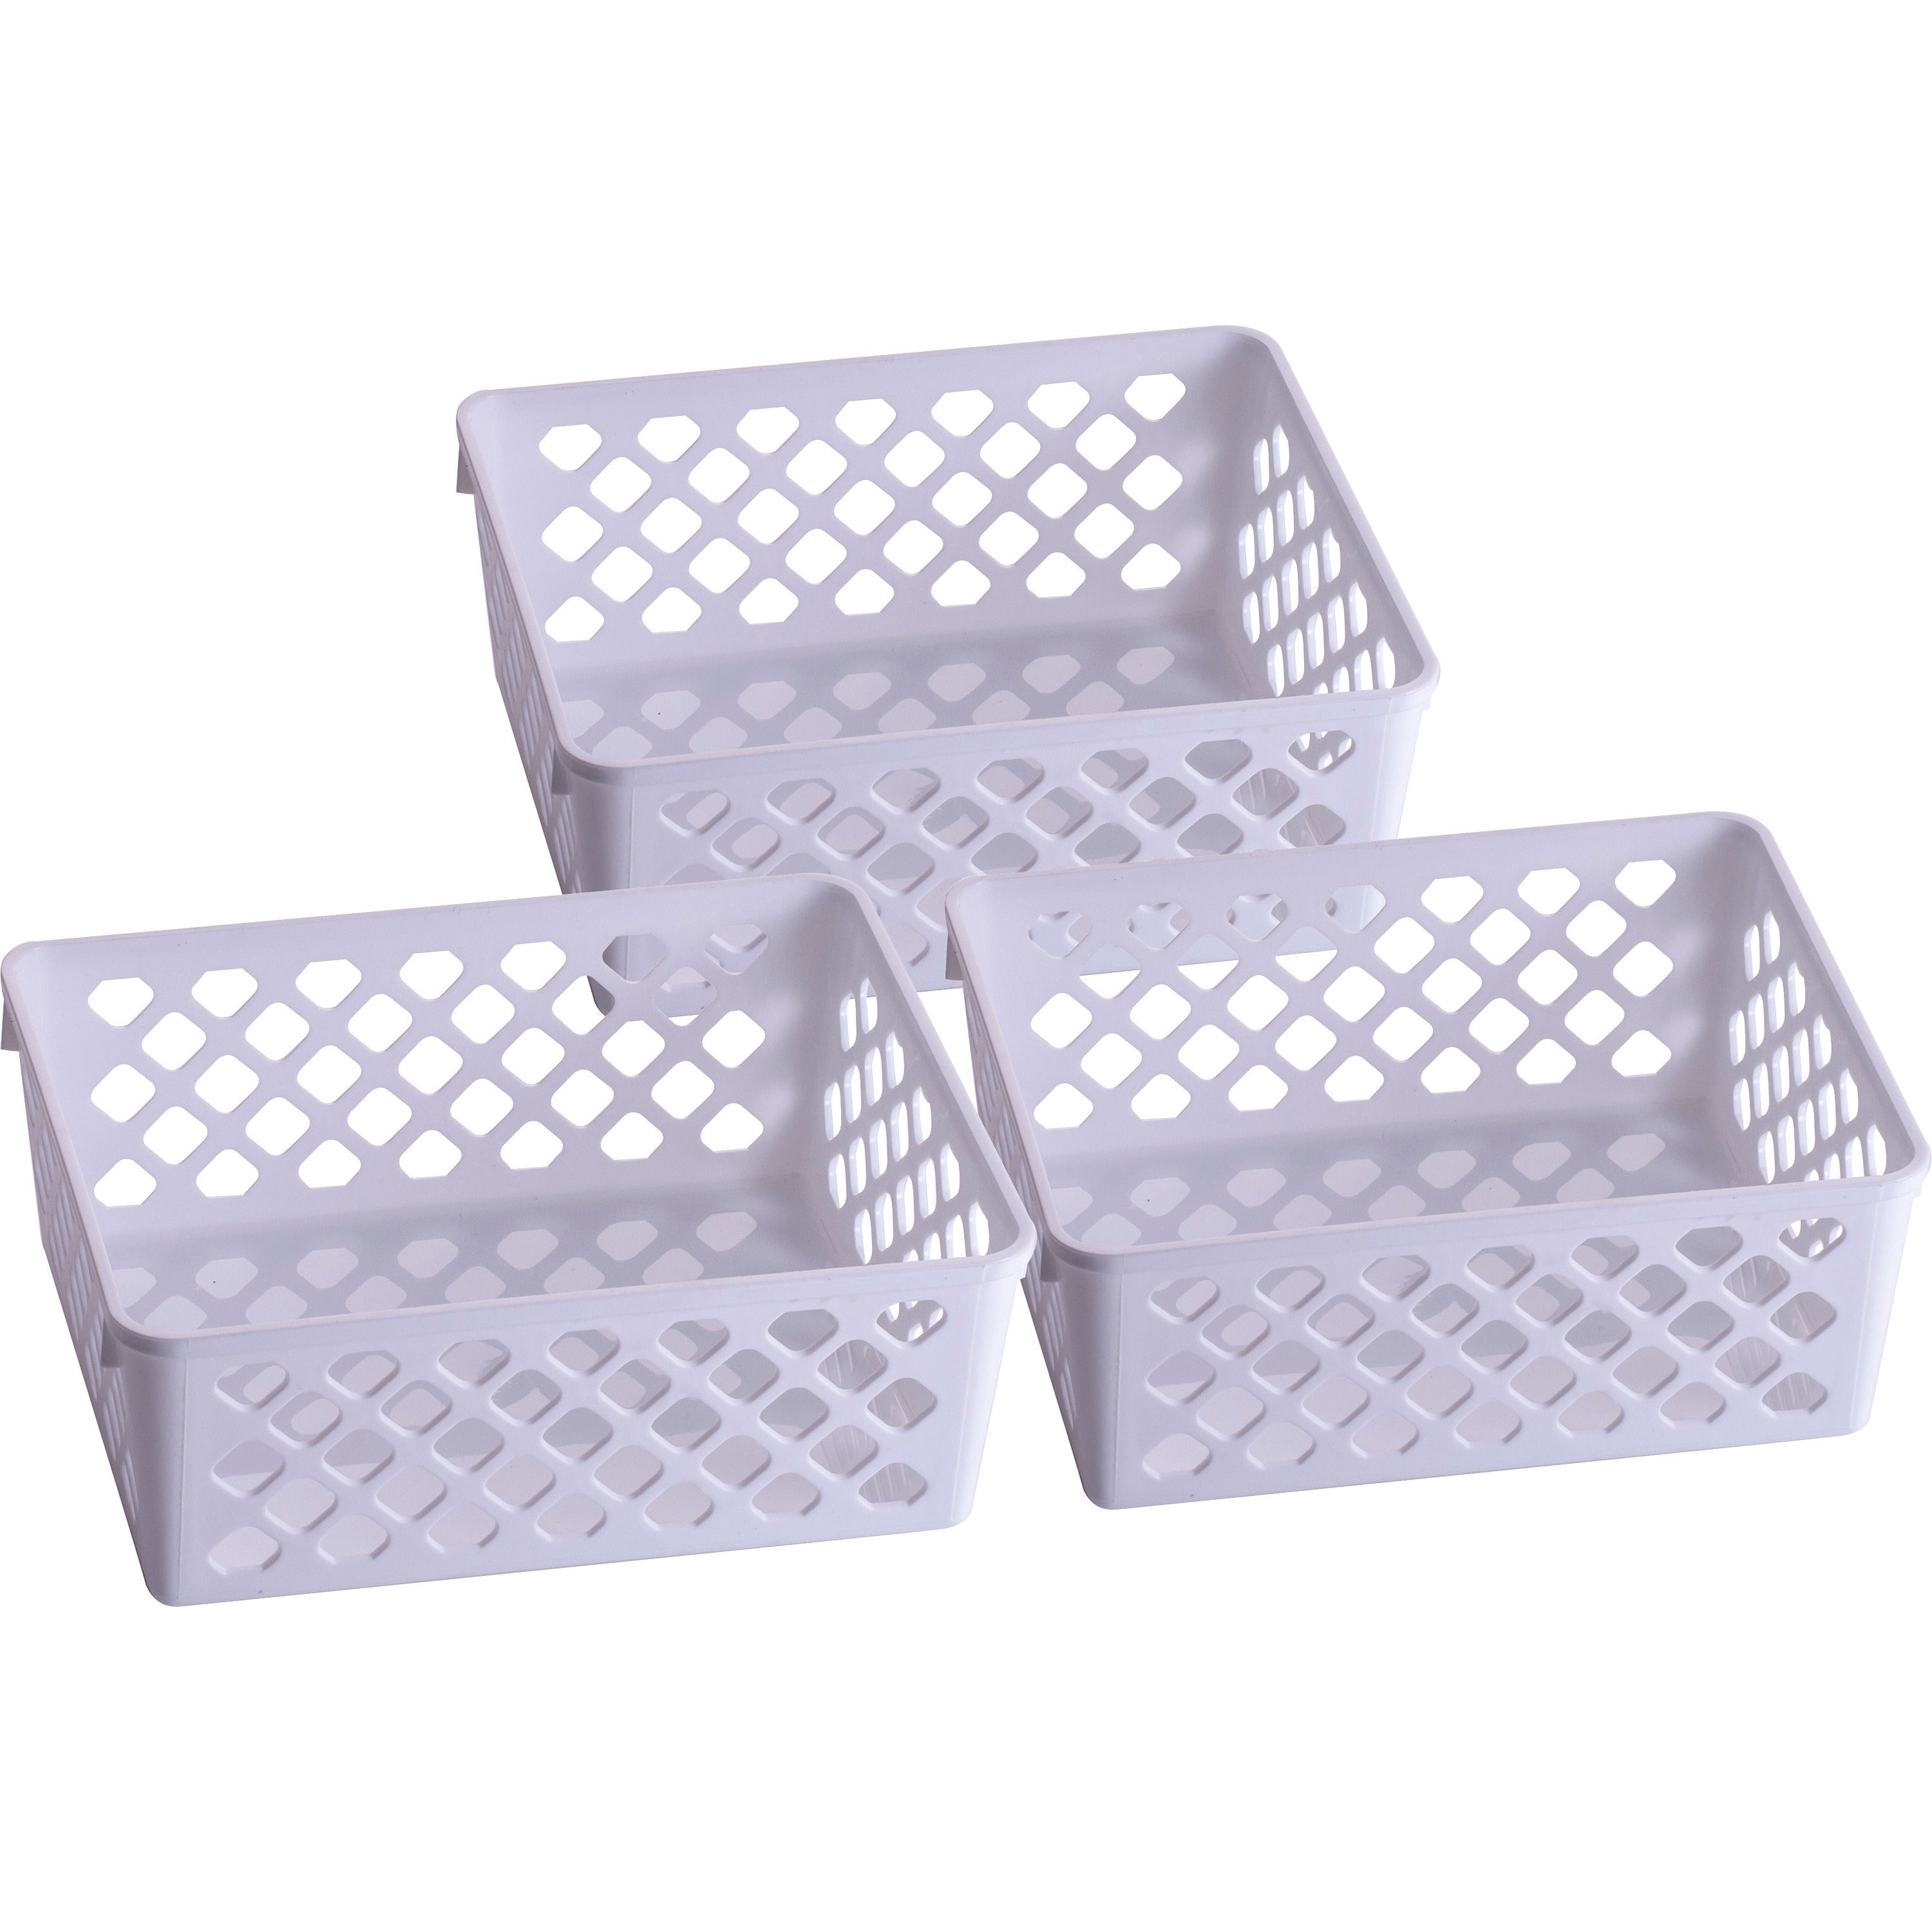 officemate-achieva-medium-supply-basket-3-pk-24-height-x-61-width-x-5-depth-compact-stackable-storage-space-white-plastic-3-pack_oic26205 - 1